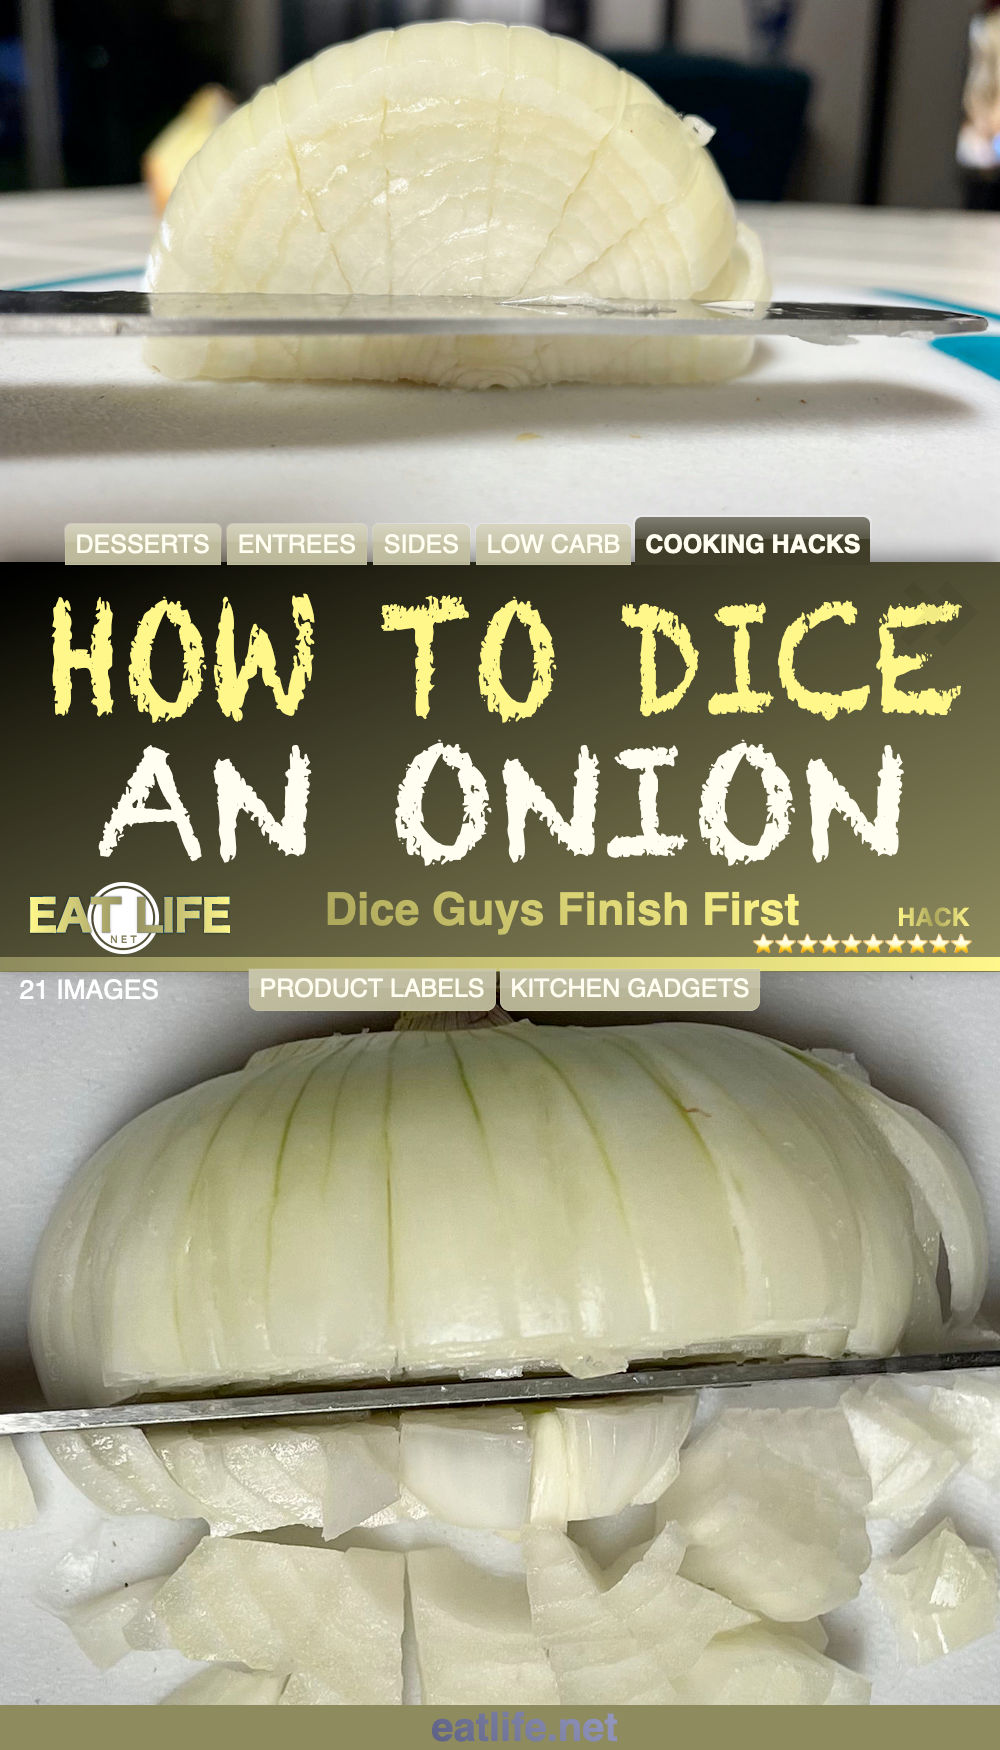 How to Dice an Onion